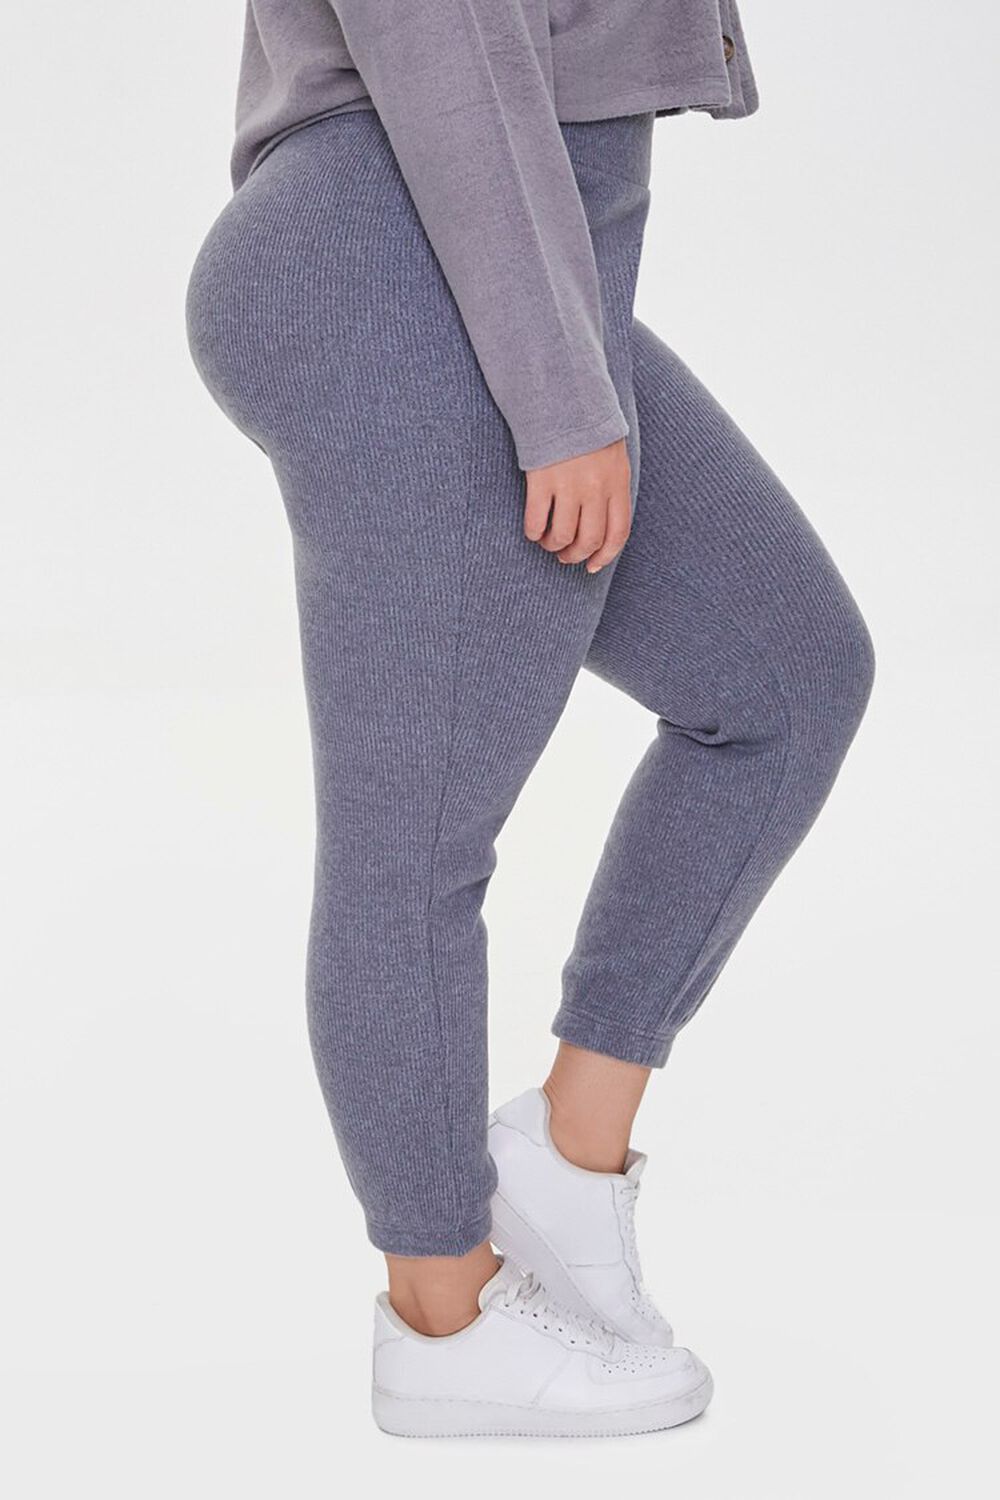 CHARCOAL Plus Size Ribbed Knit Joggers, image 3